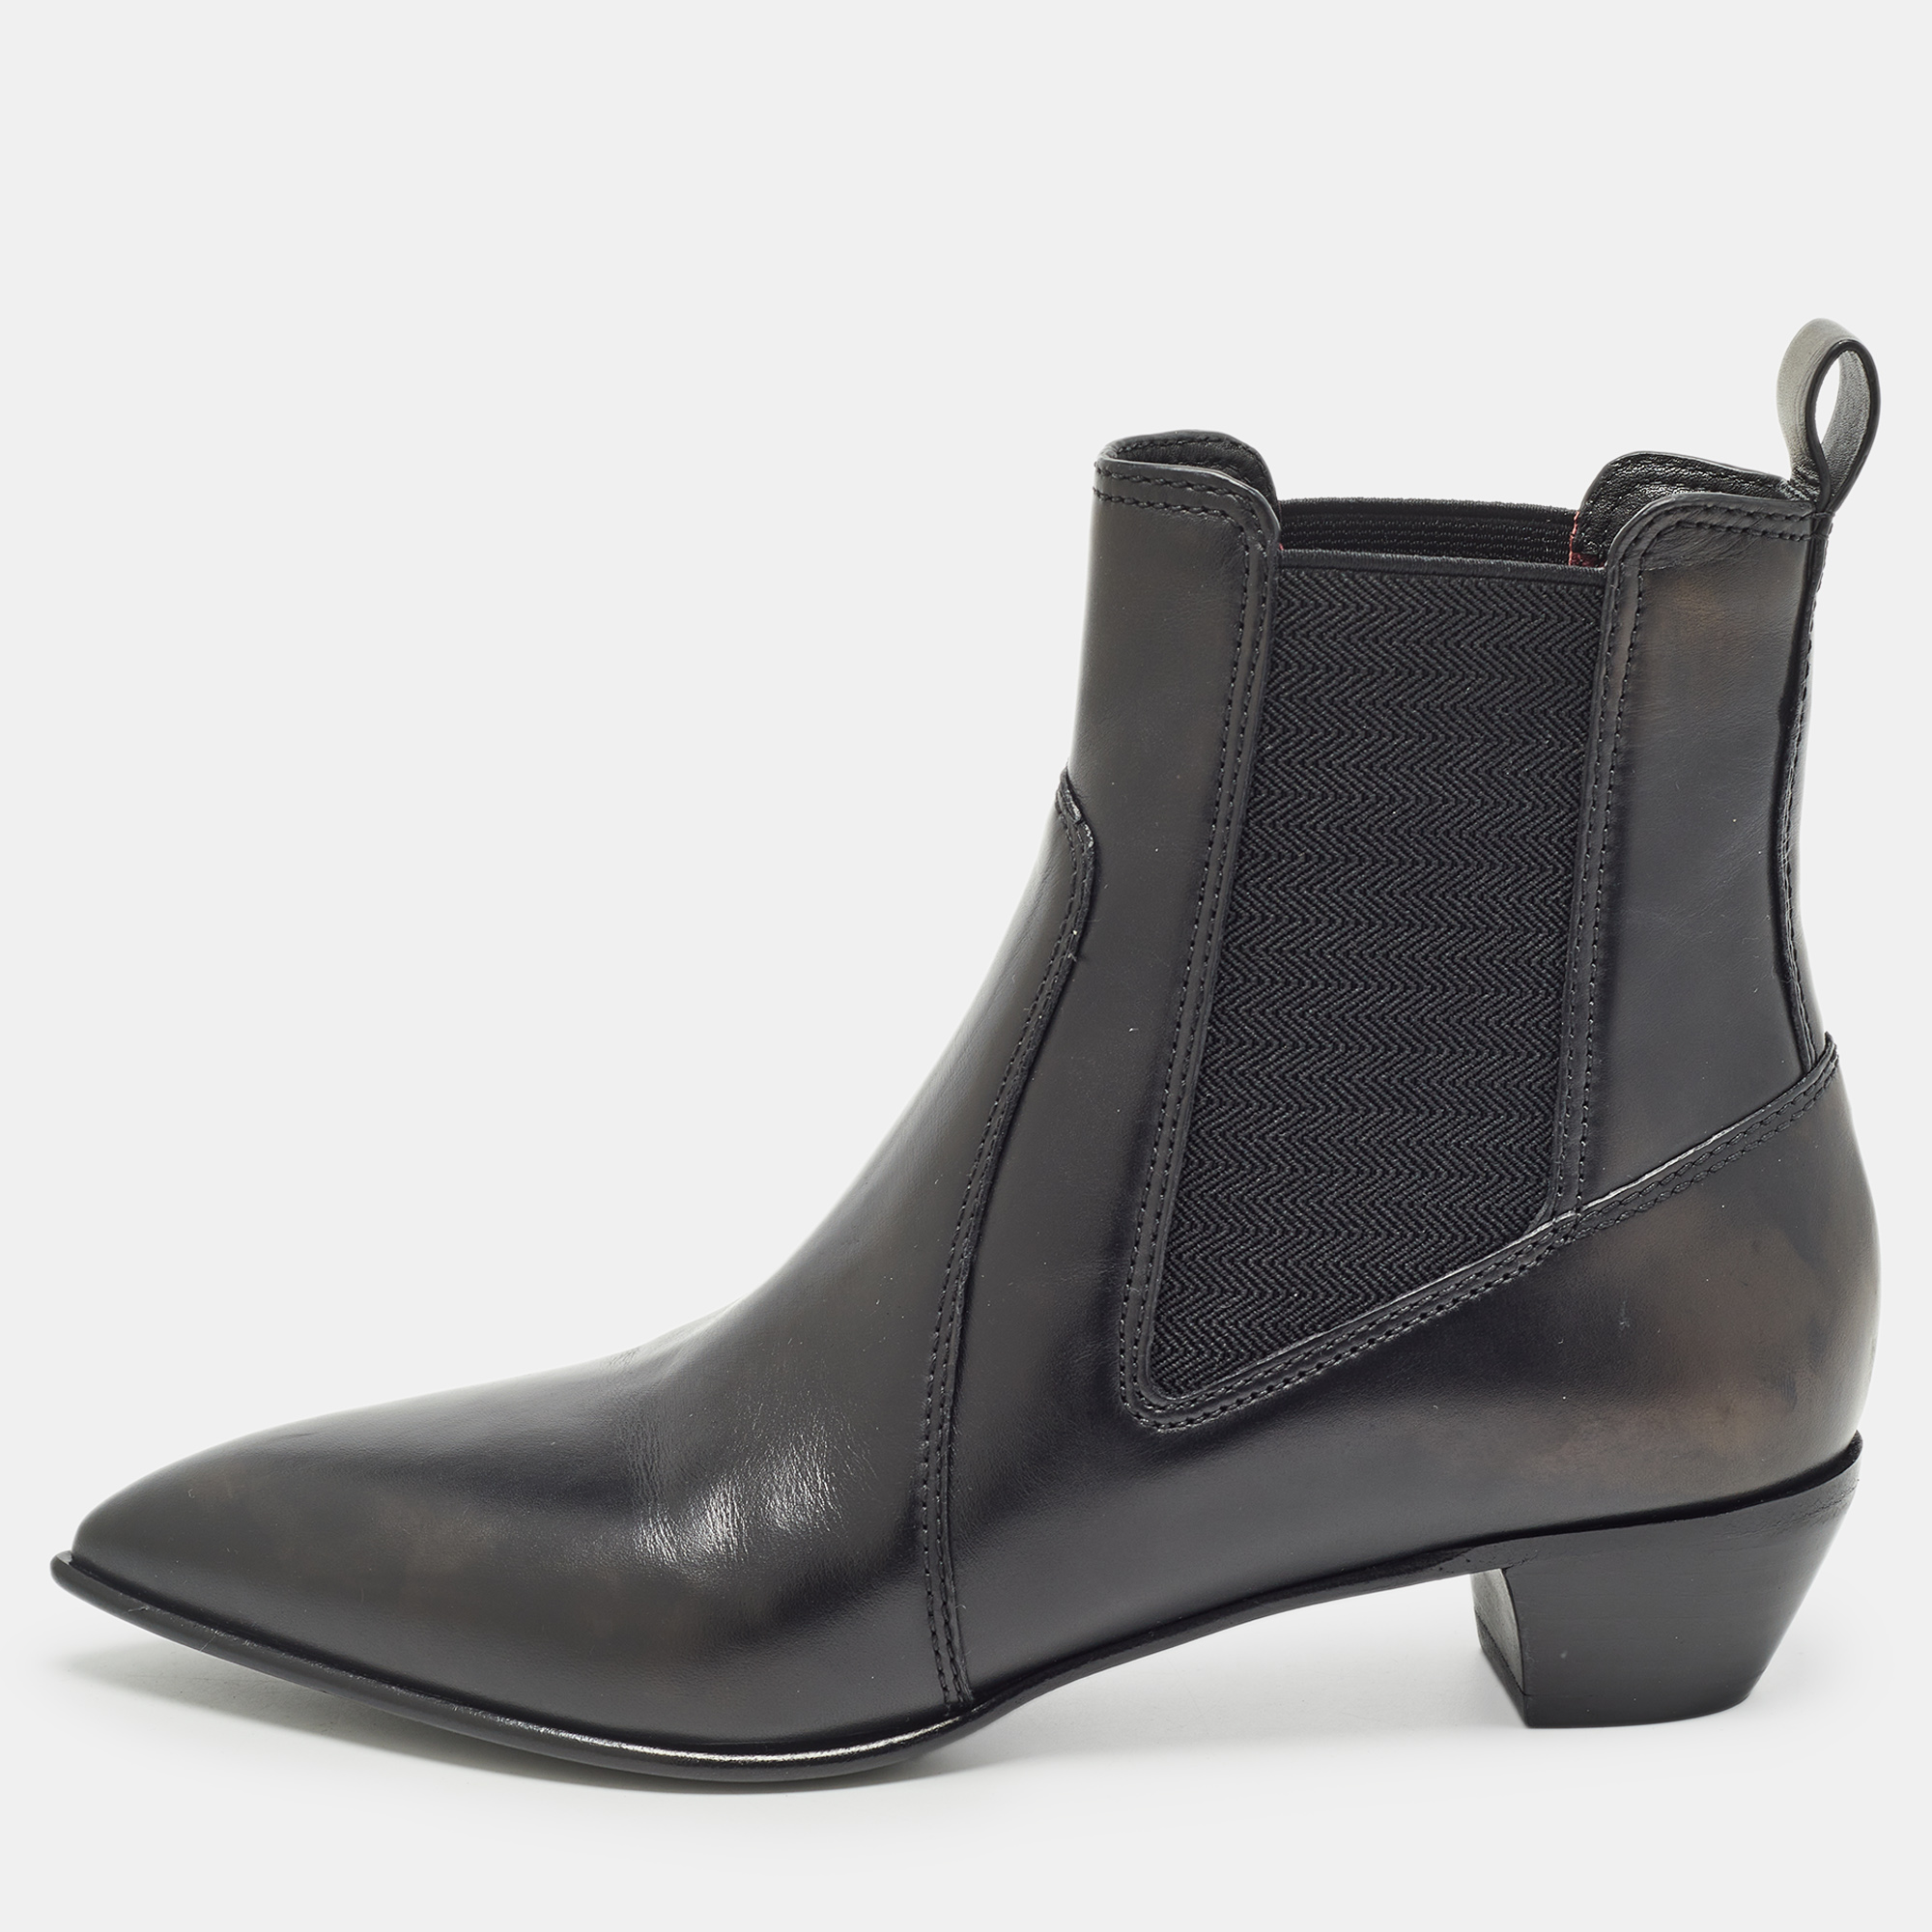 

Marc by Marc Jacobs Black Leather Ankle Boots Size